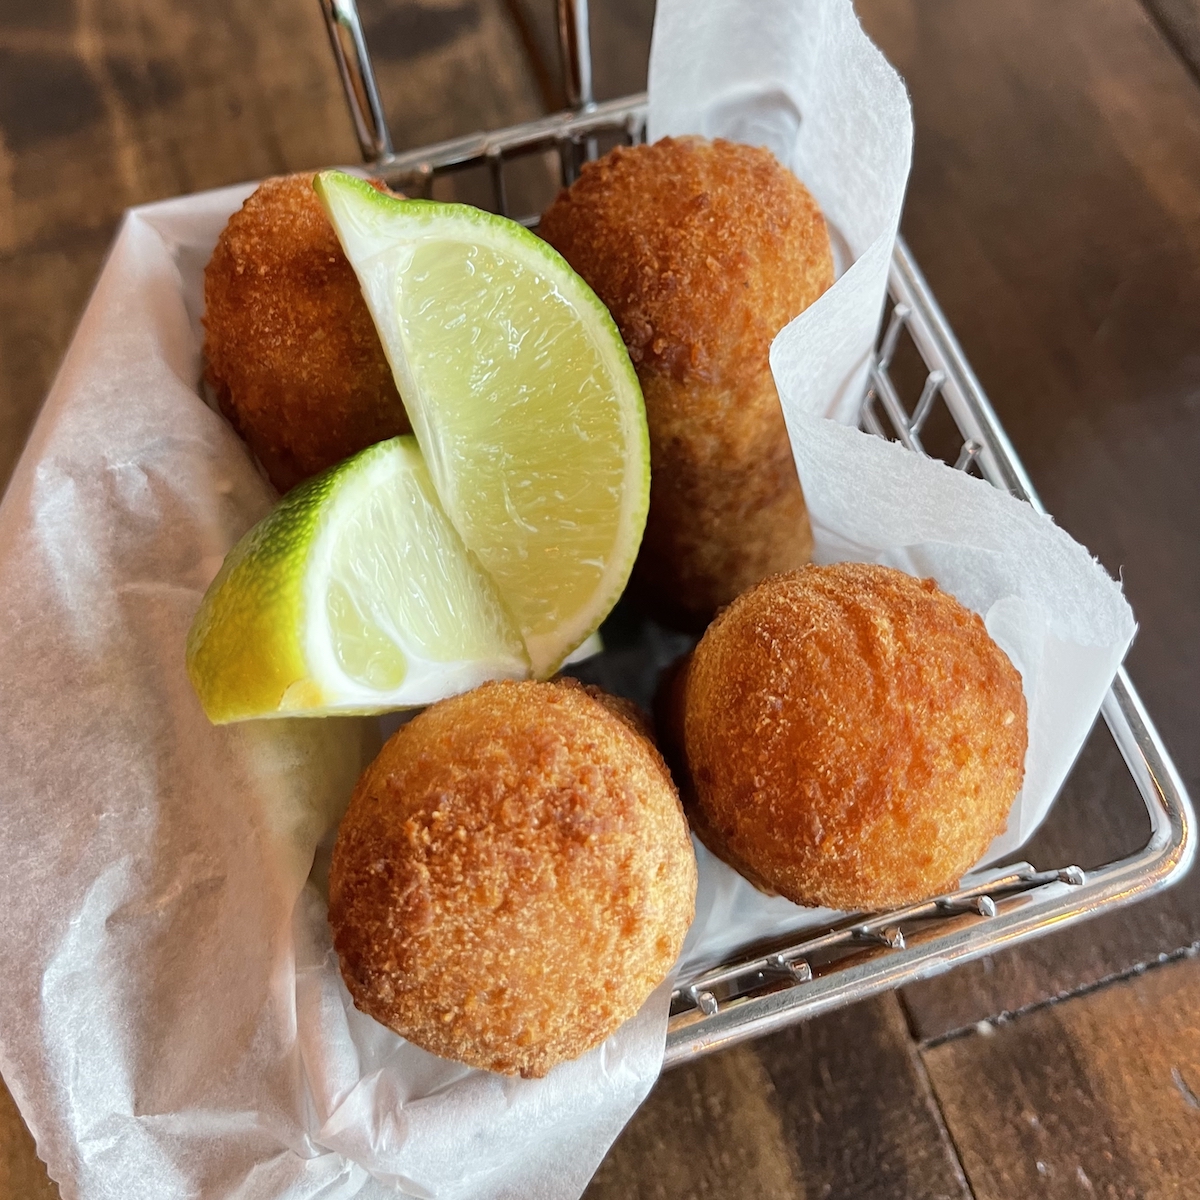 Smoked Gouda and Ham Croquetas from Smoke and Dough in West Kendall, Florida